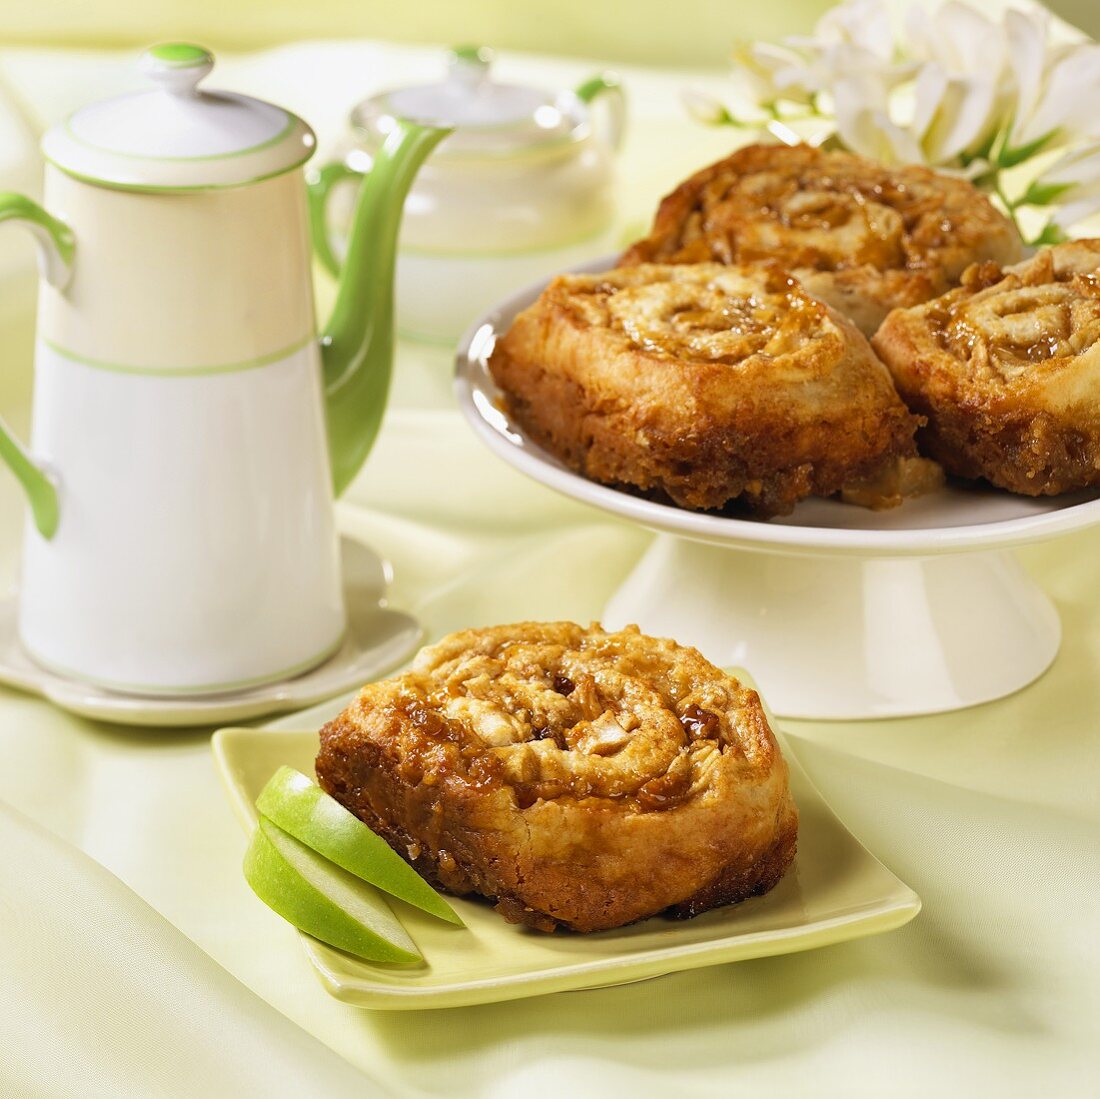 A Cinnamon Apple Roll with Walnuts on a Square Green Plate